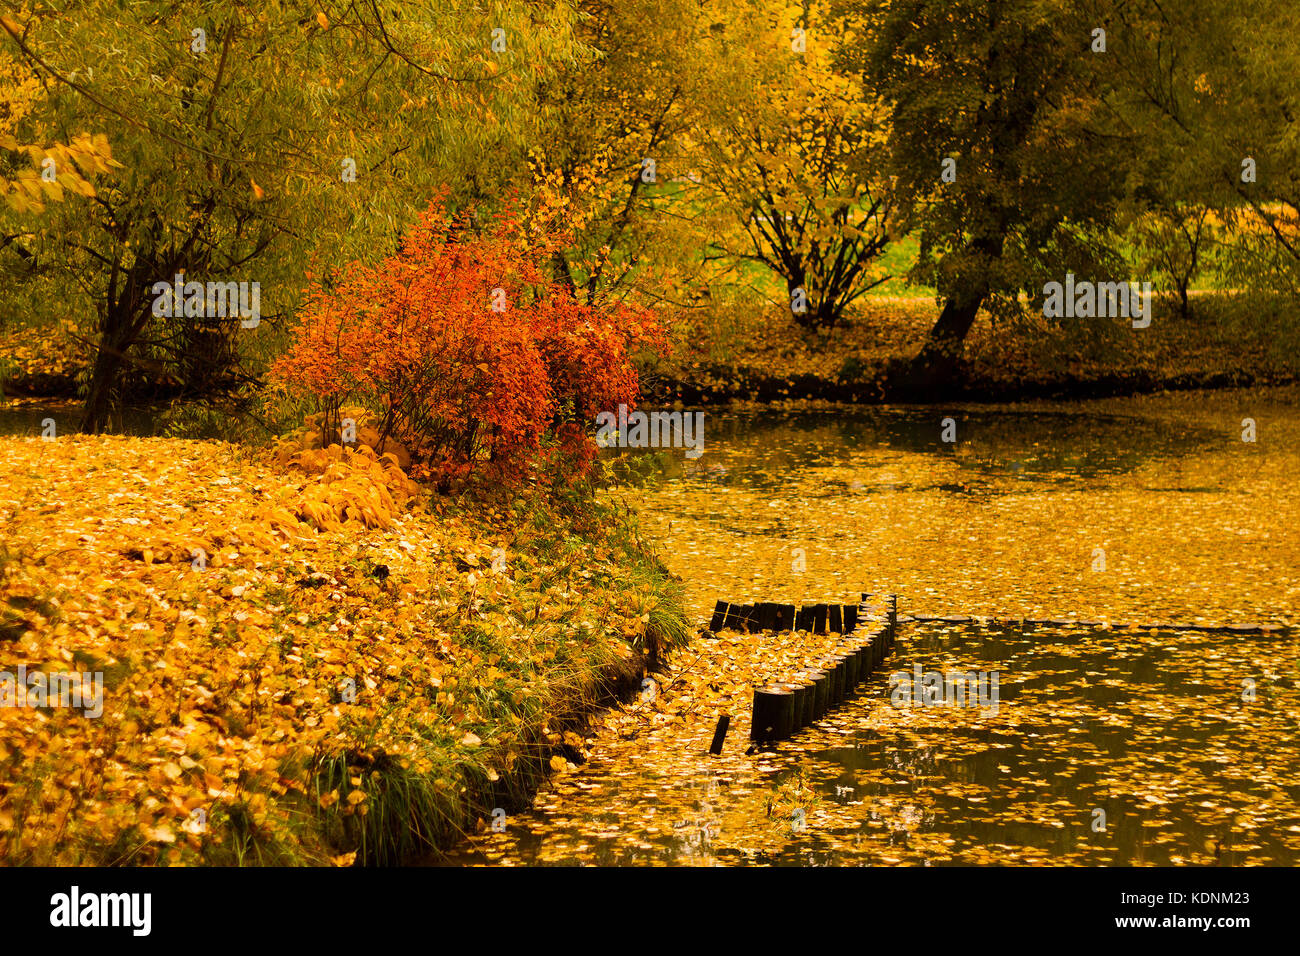 Trees in a park by an autumn day with yellow, green and red leaves at the shore of a pond. Stock Photo